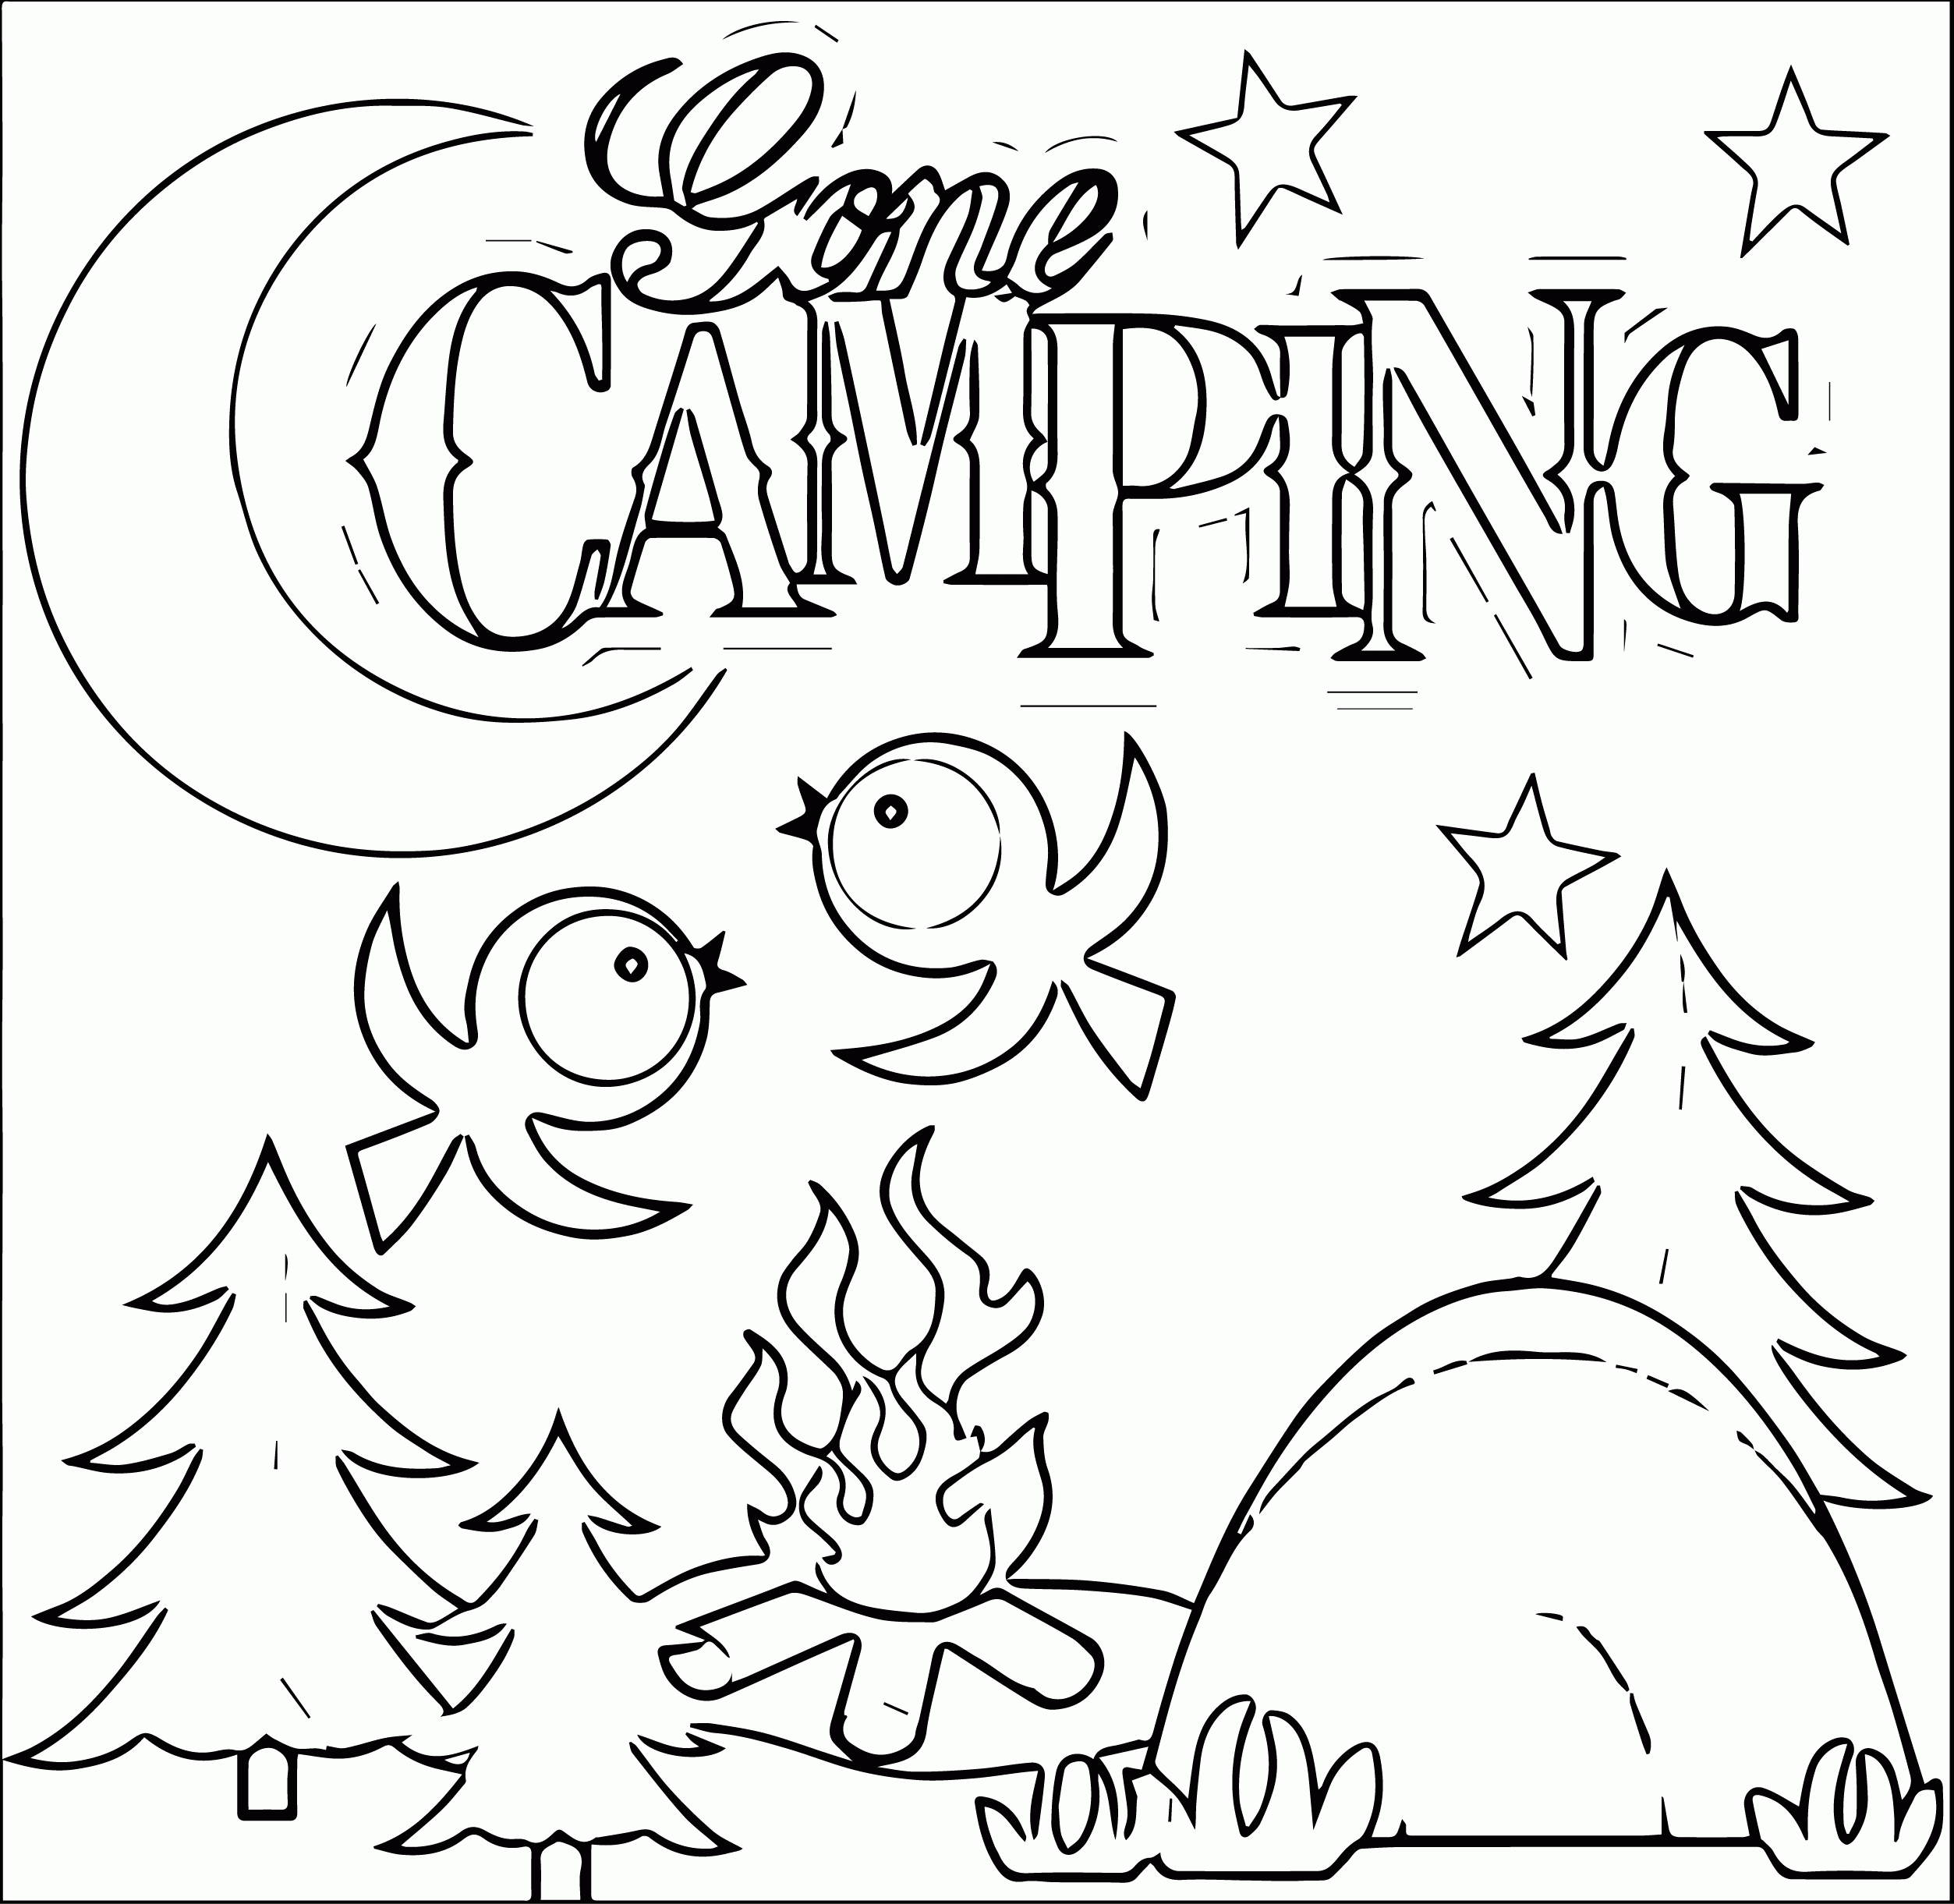 Download Camping Coloring Pages - Best Coloring Pages For Kids